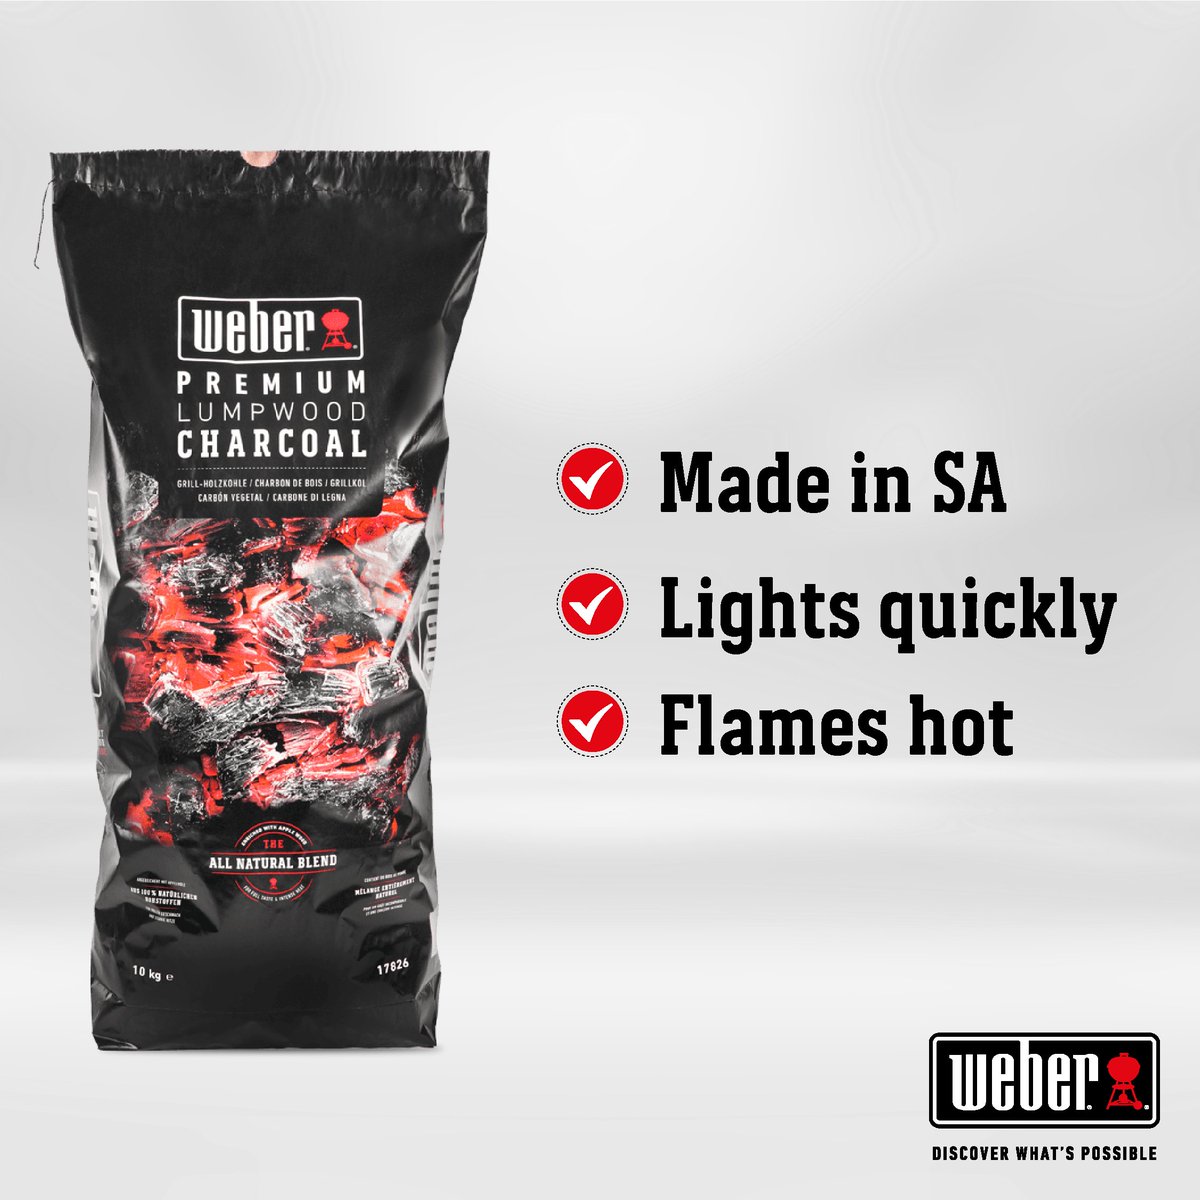 Think local and think fast flavour when you hear Premium Lumpwood Charcoal. ❤️‍🔥 ☑Made in SA ☑Lights quickly ☑Flames hot weber.co.za/product/weber-… Weber: For South Africans, the true masters of braaiing. #weberbraaisa #lumpwood #local #flavouraboveall #discoverwhatspossible